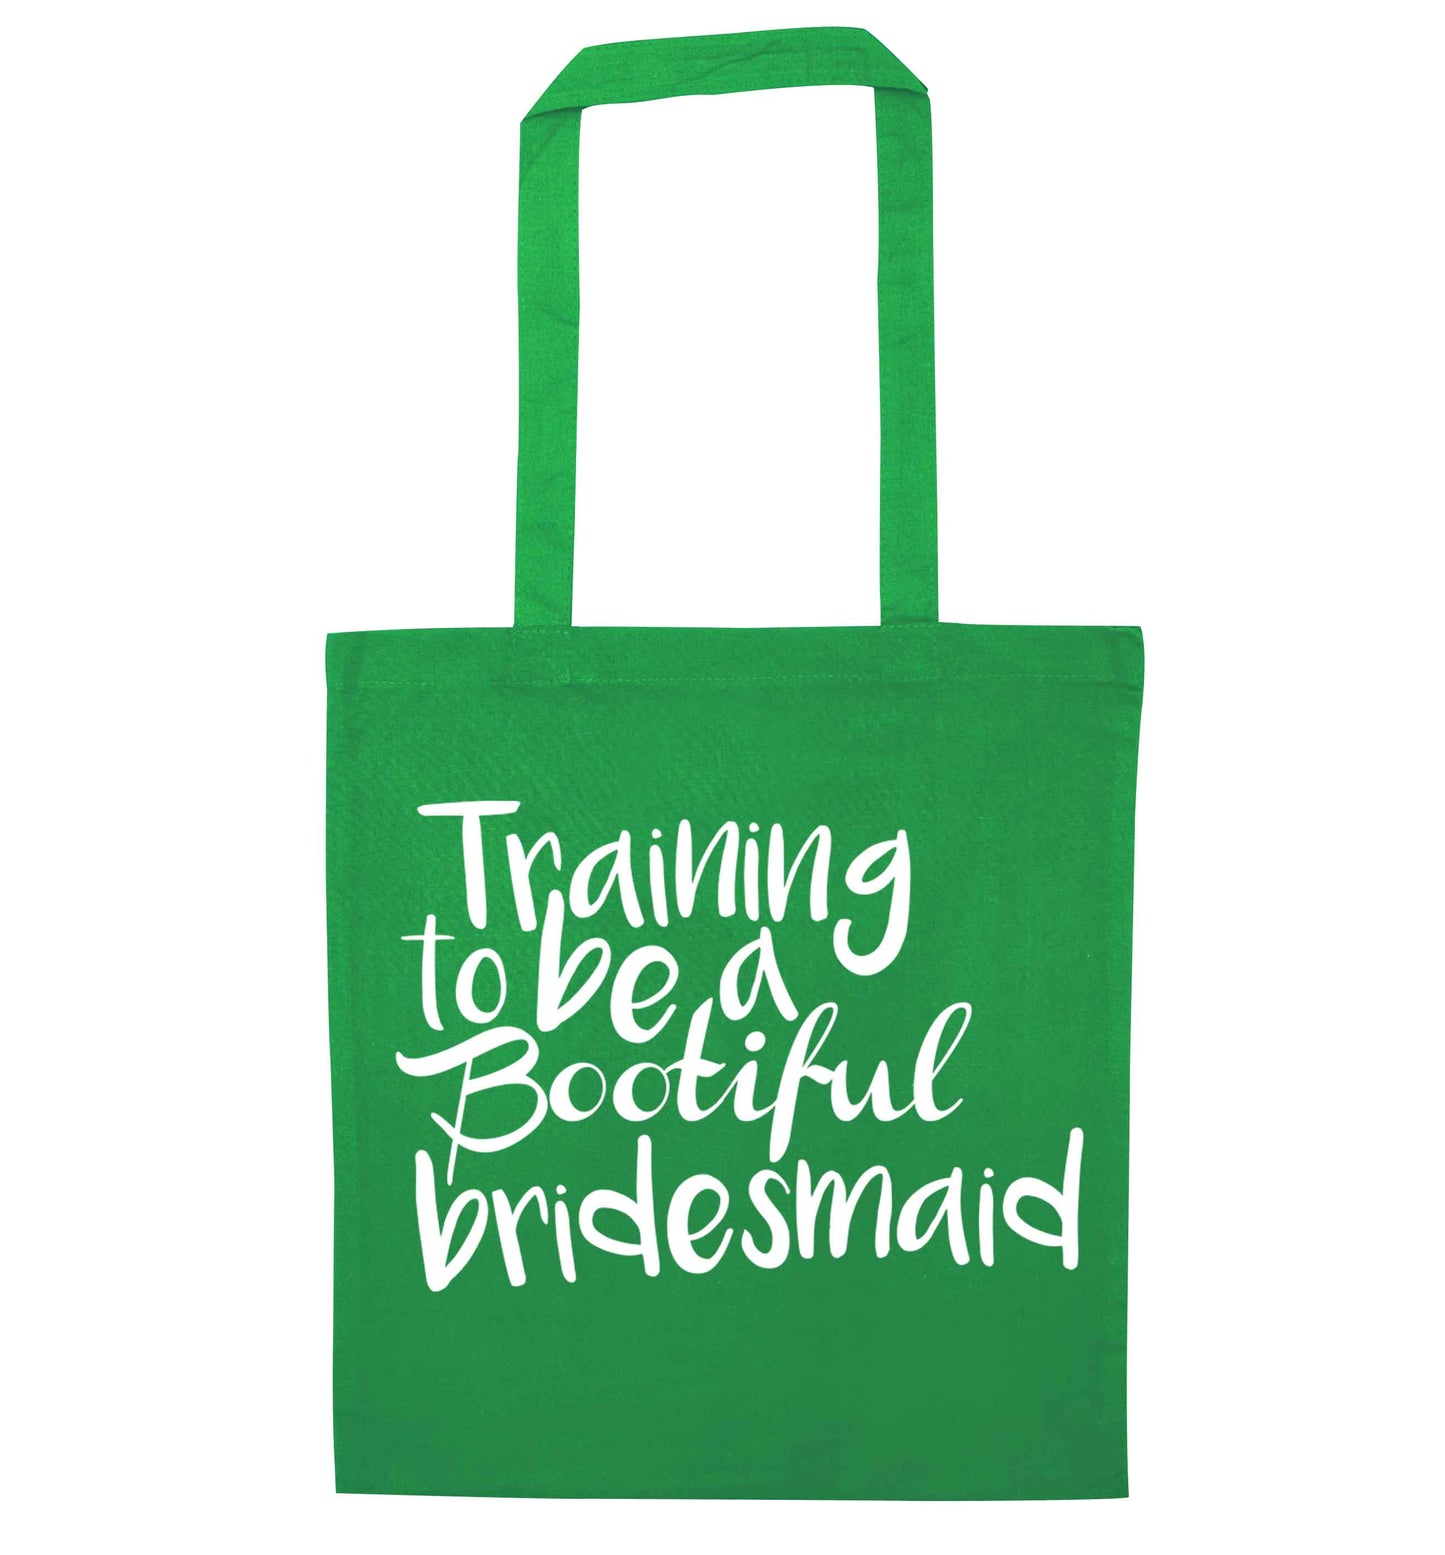 Get motivated and get fit for your big day! Our workout quotes and designs will get you ready to sweat! Perfect for any bride, groom or bridesmaid to be!  green tote bag